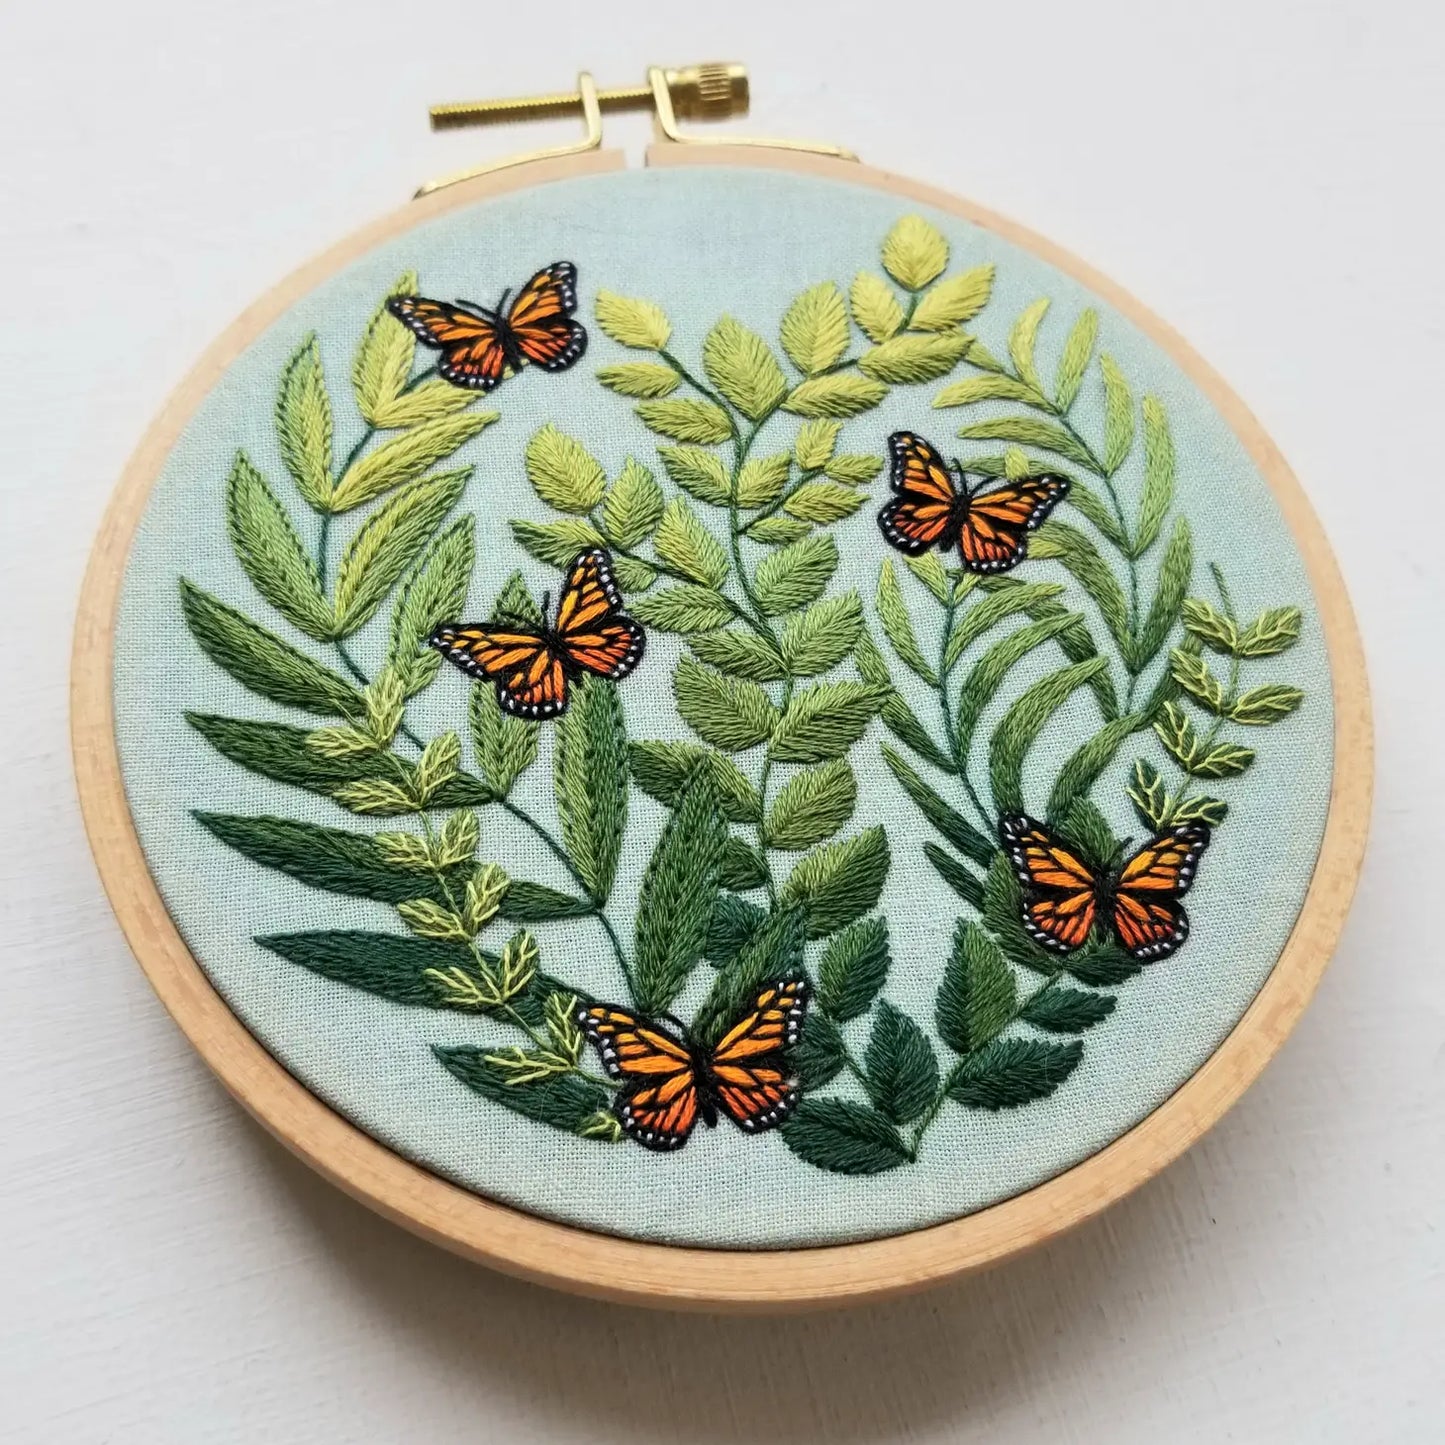 Beginner Hand Embroidery Kits